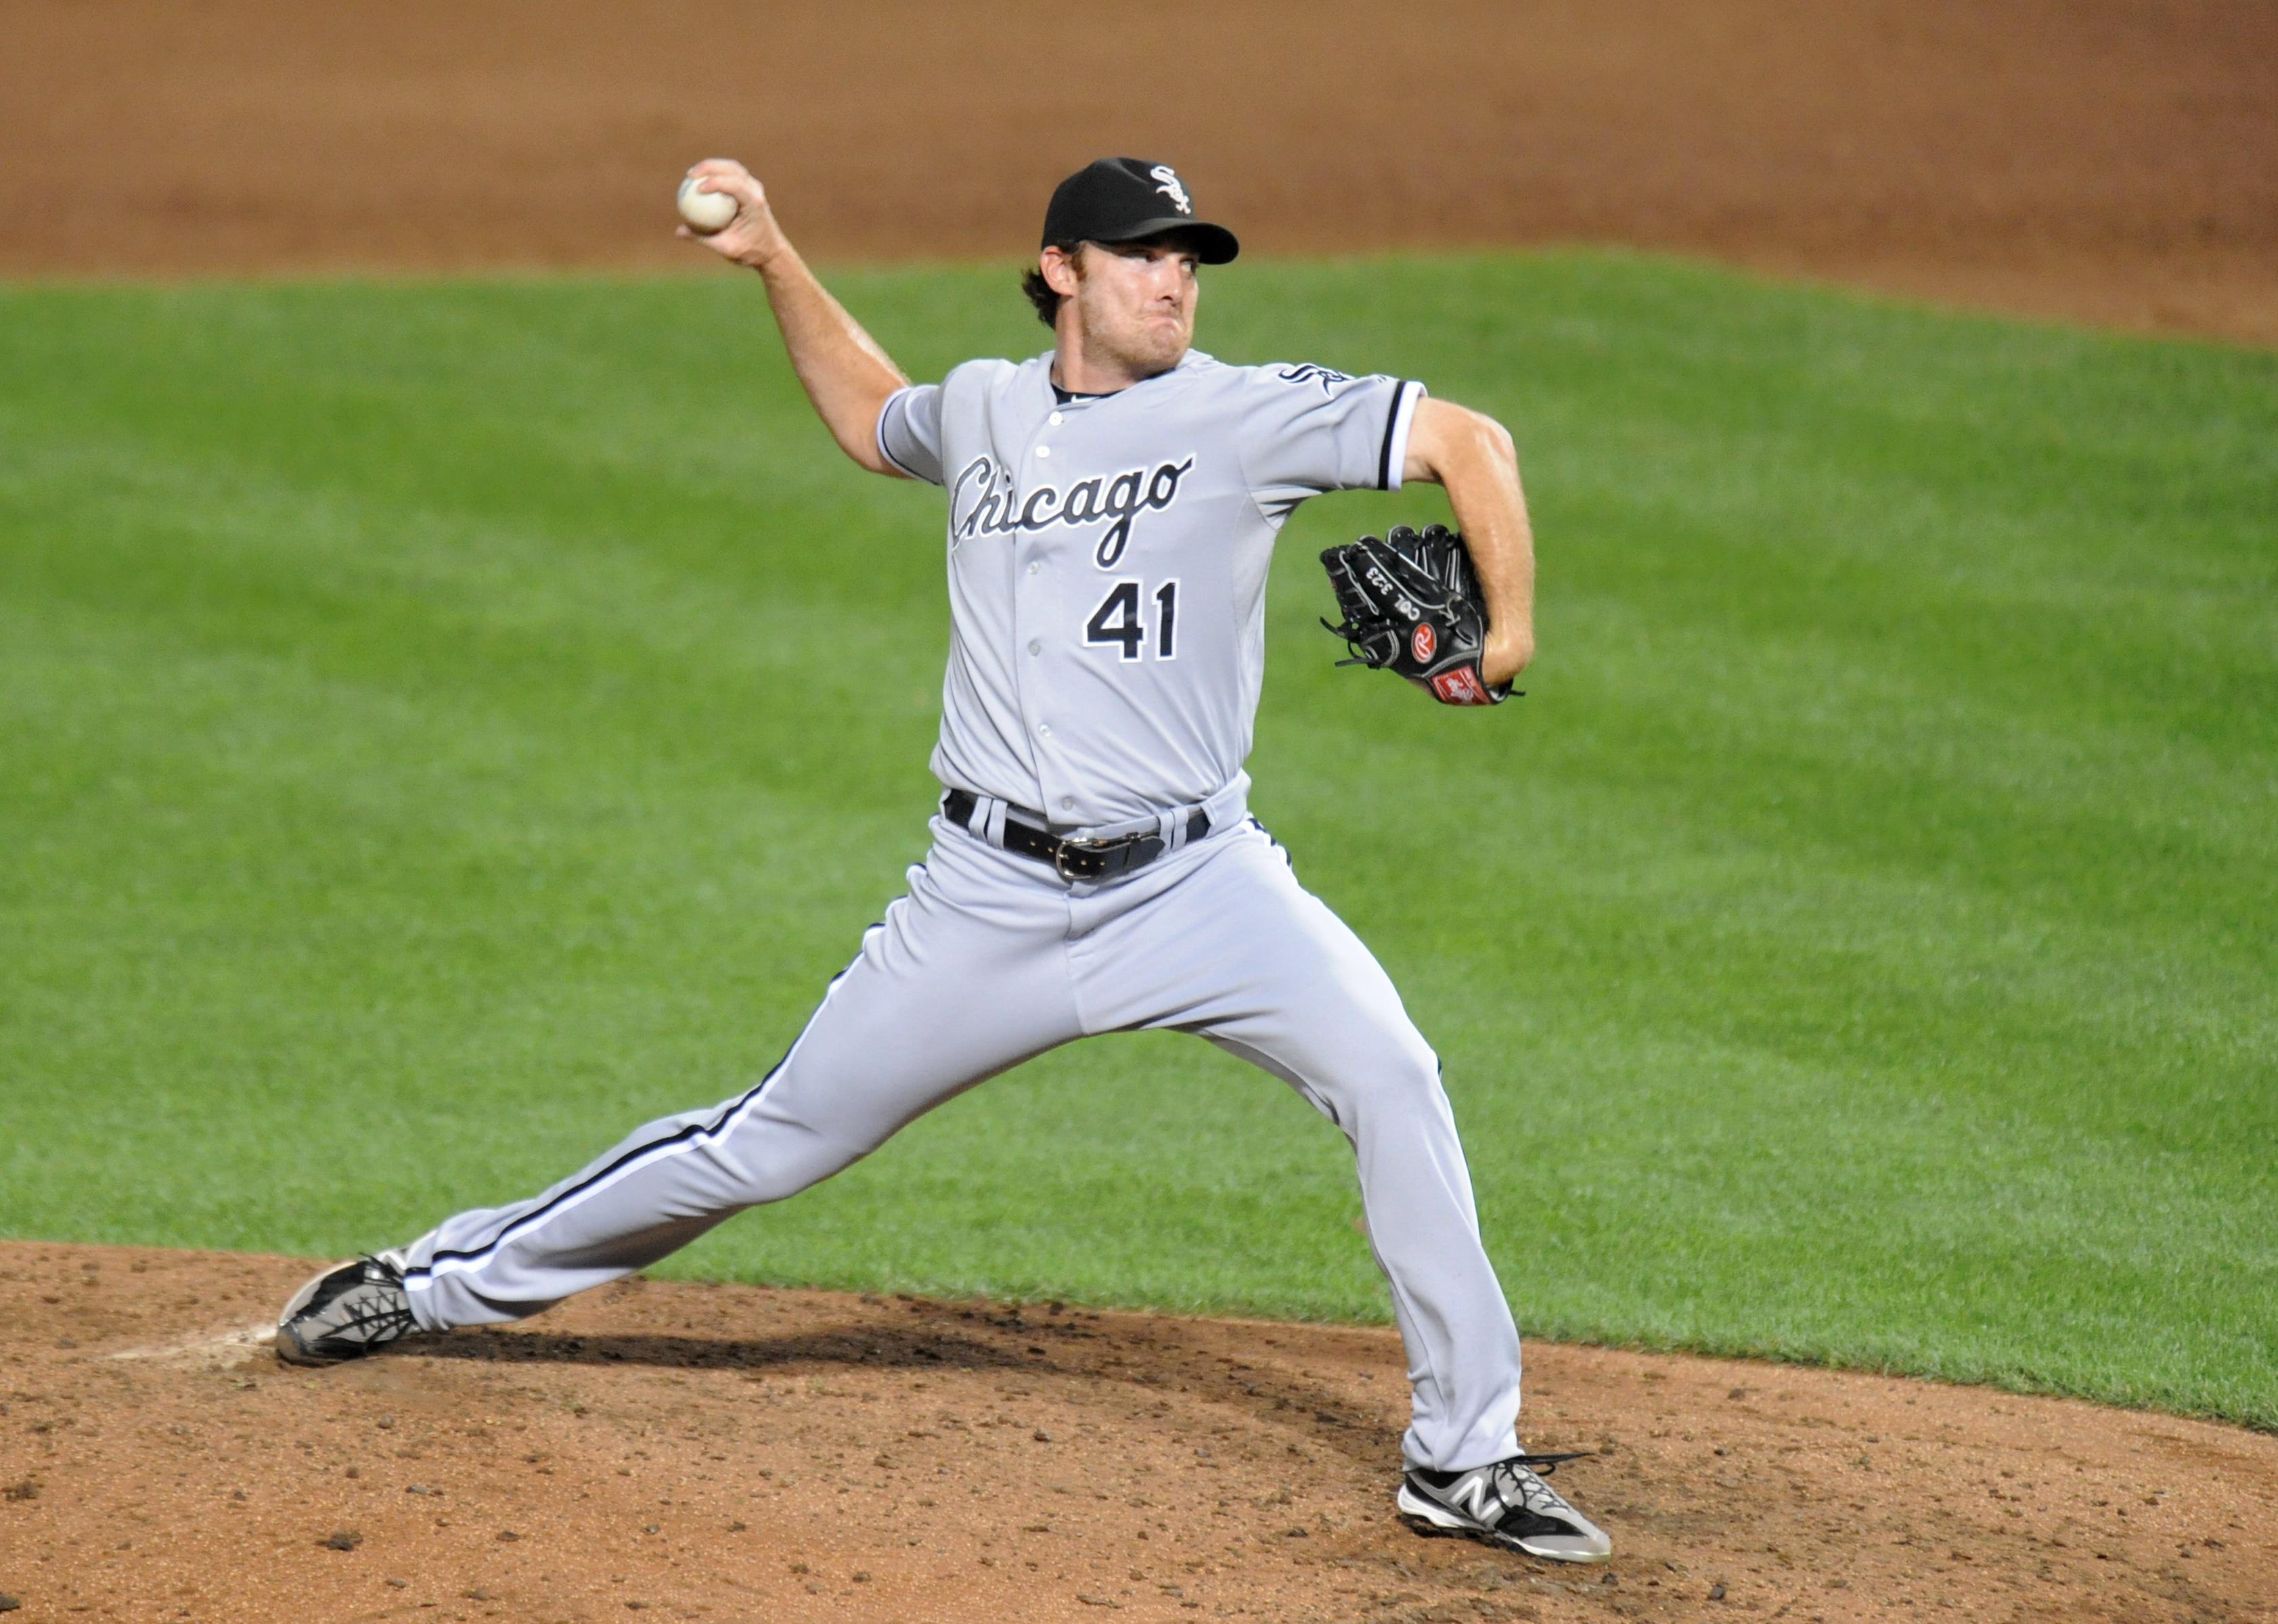 Philip Humber #41 of the Chicago White Sox pitches during a baseball game.